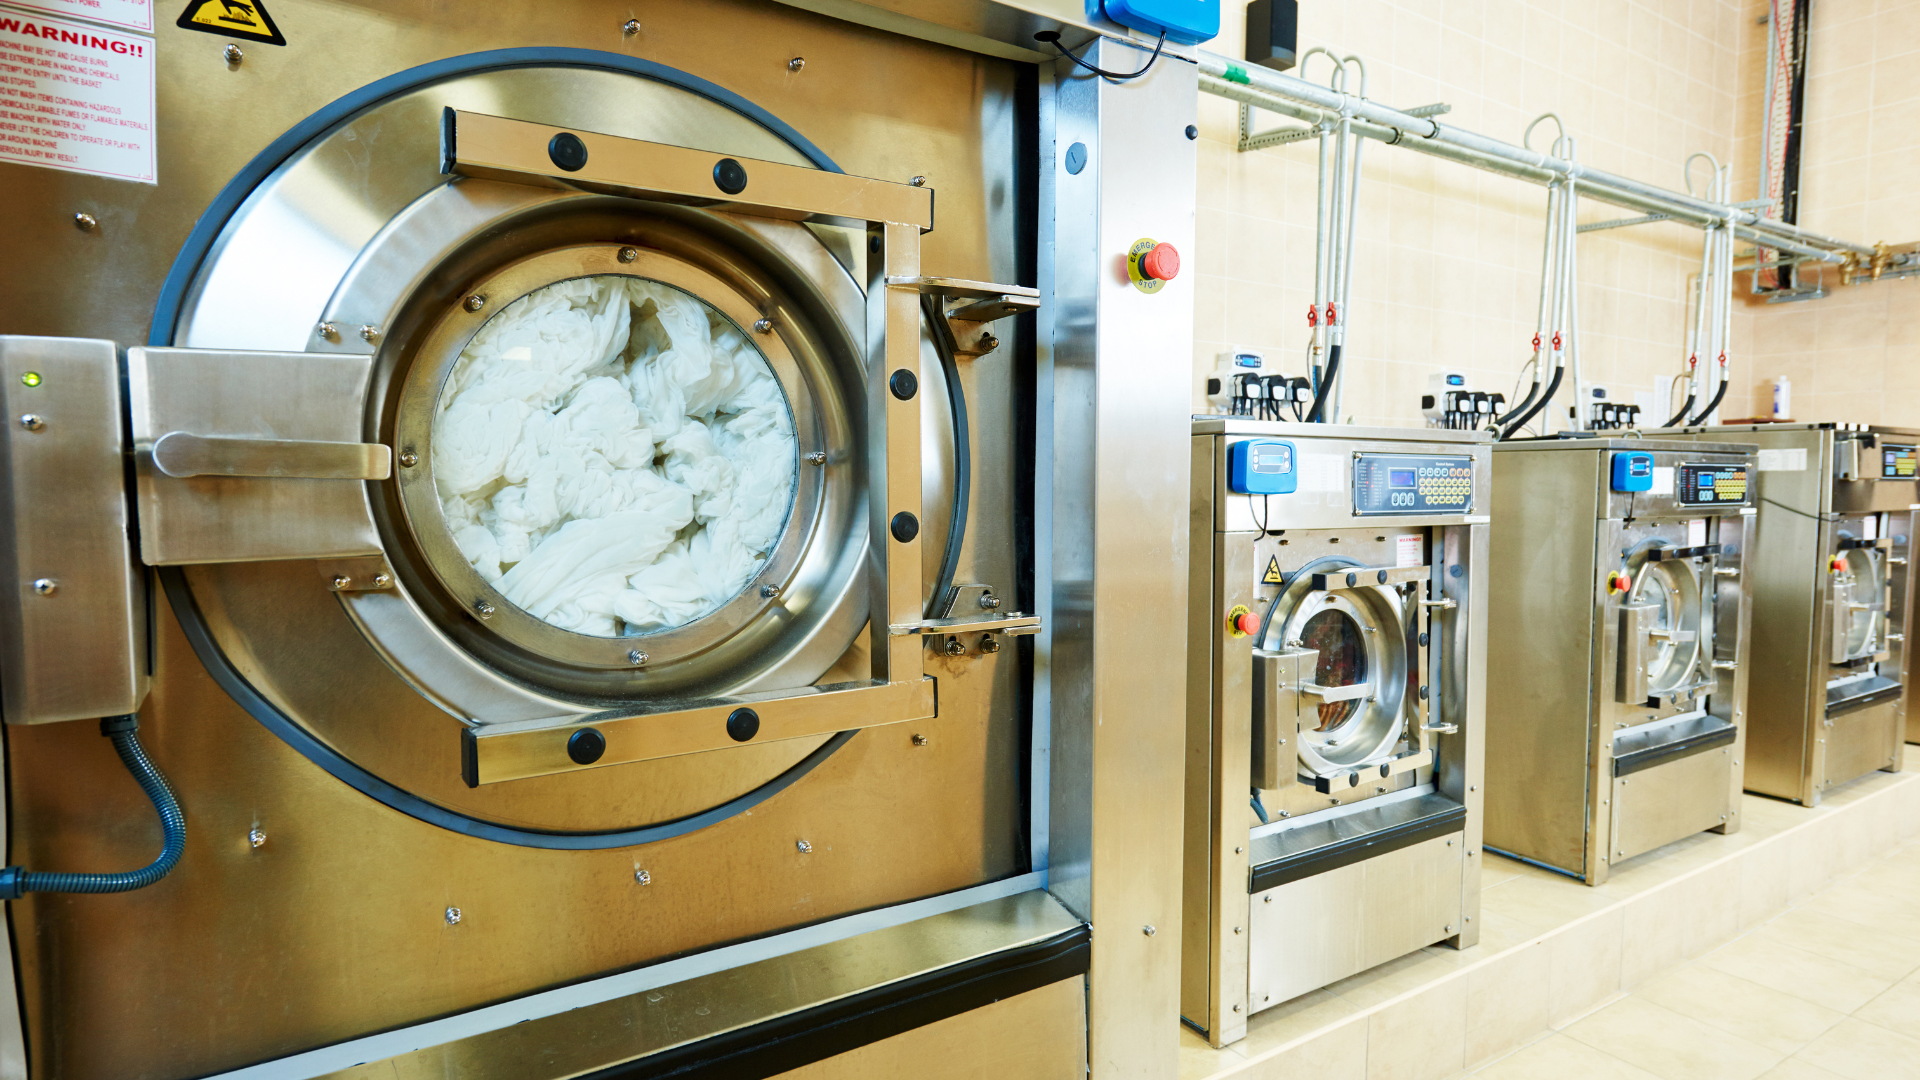 RFID washing machines in an industrial laundry